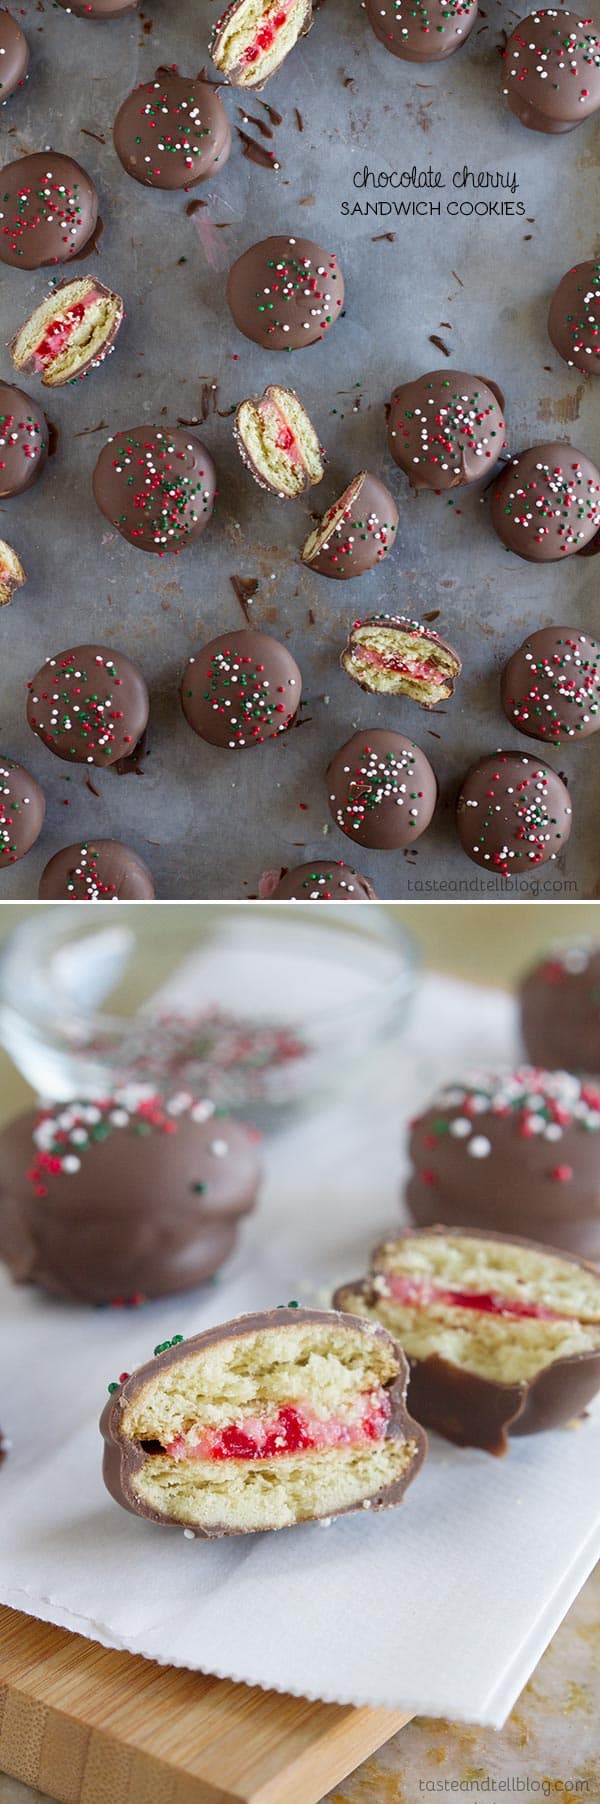 Chocolate Cherry Sandwich Cookies - these no bake cookies are festive and perfect for gift giving.